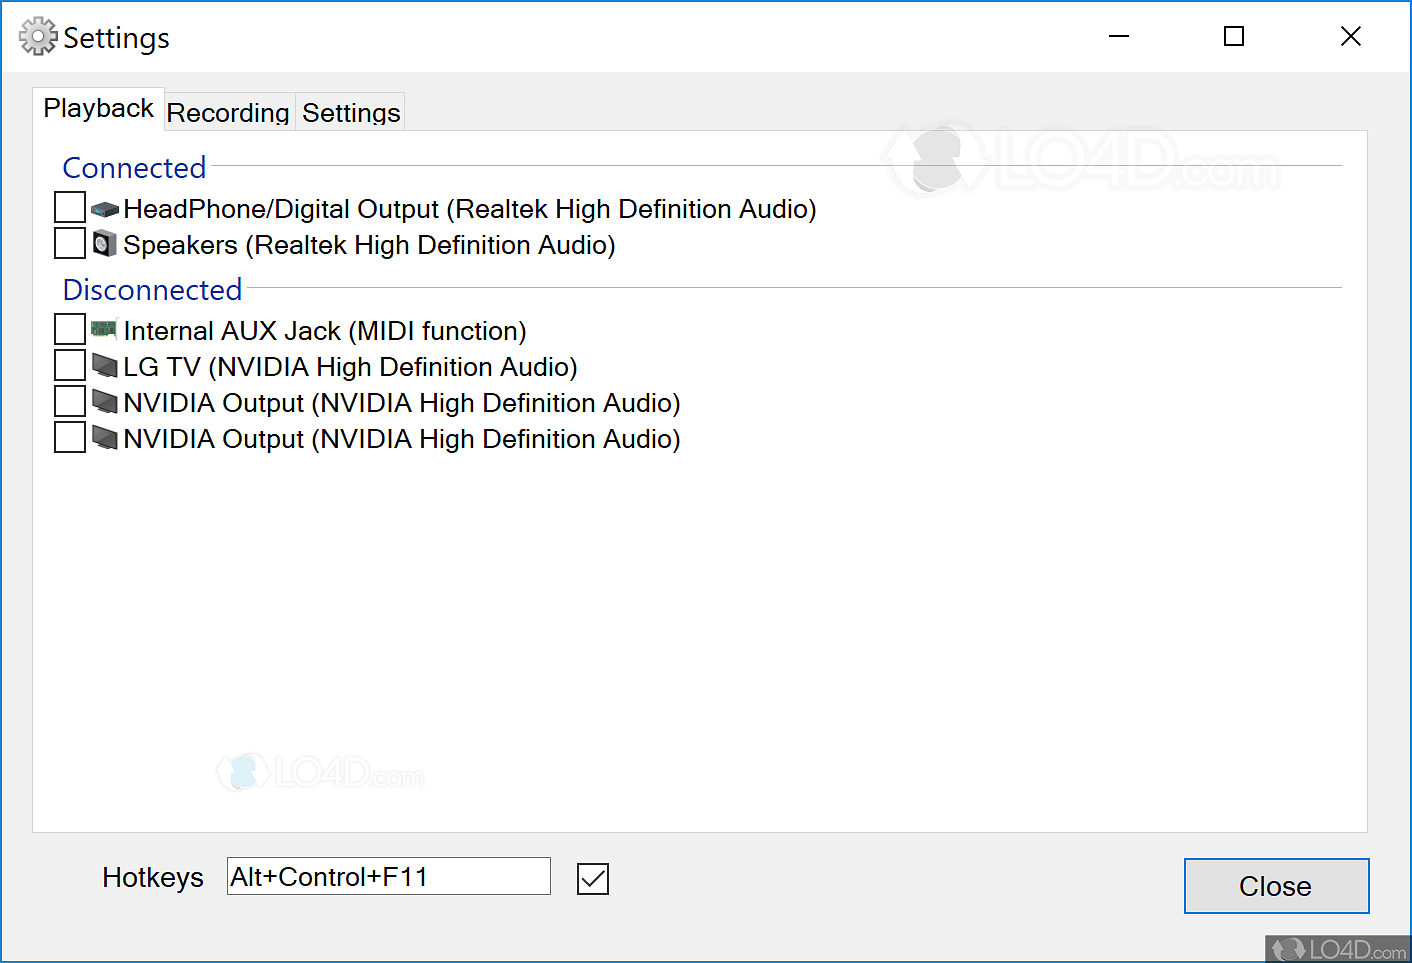 download soundswitch 6.4.3.0